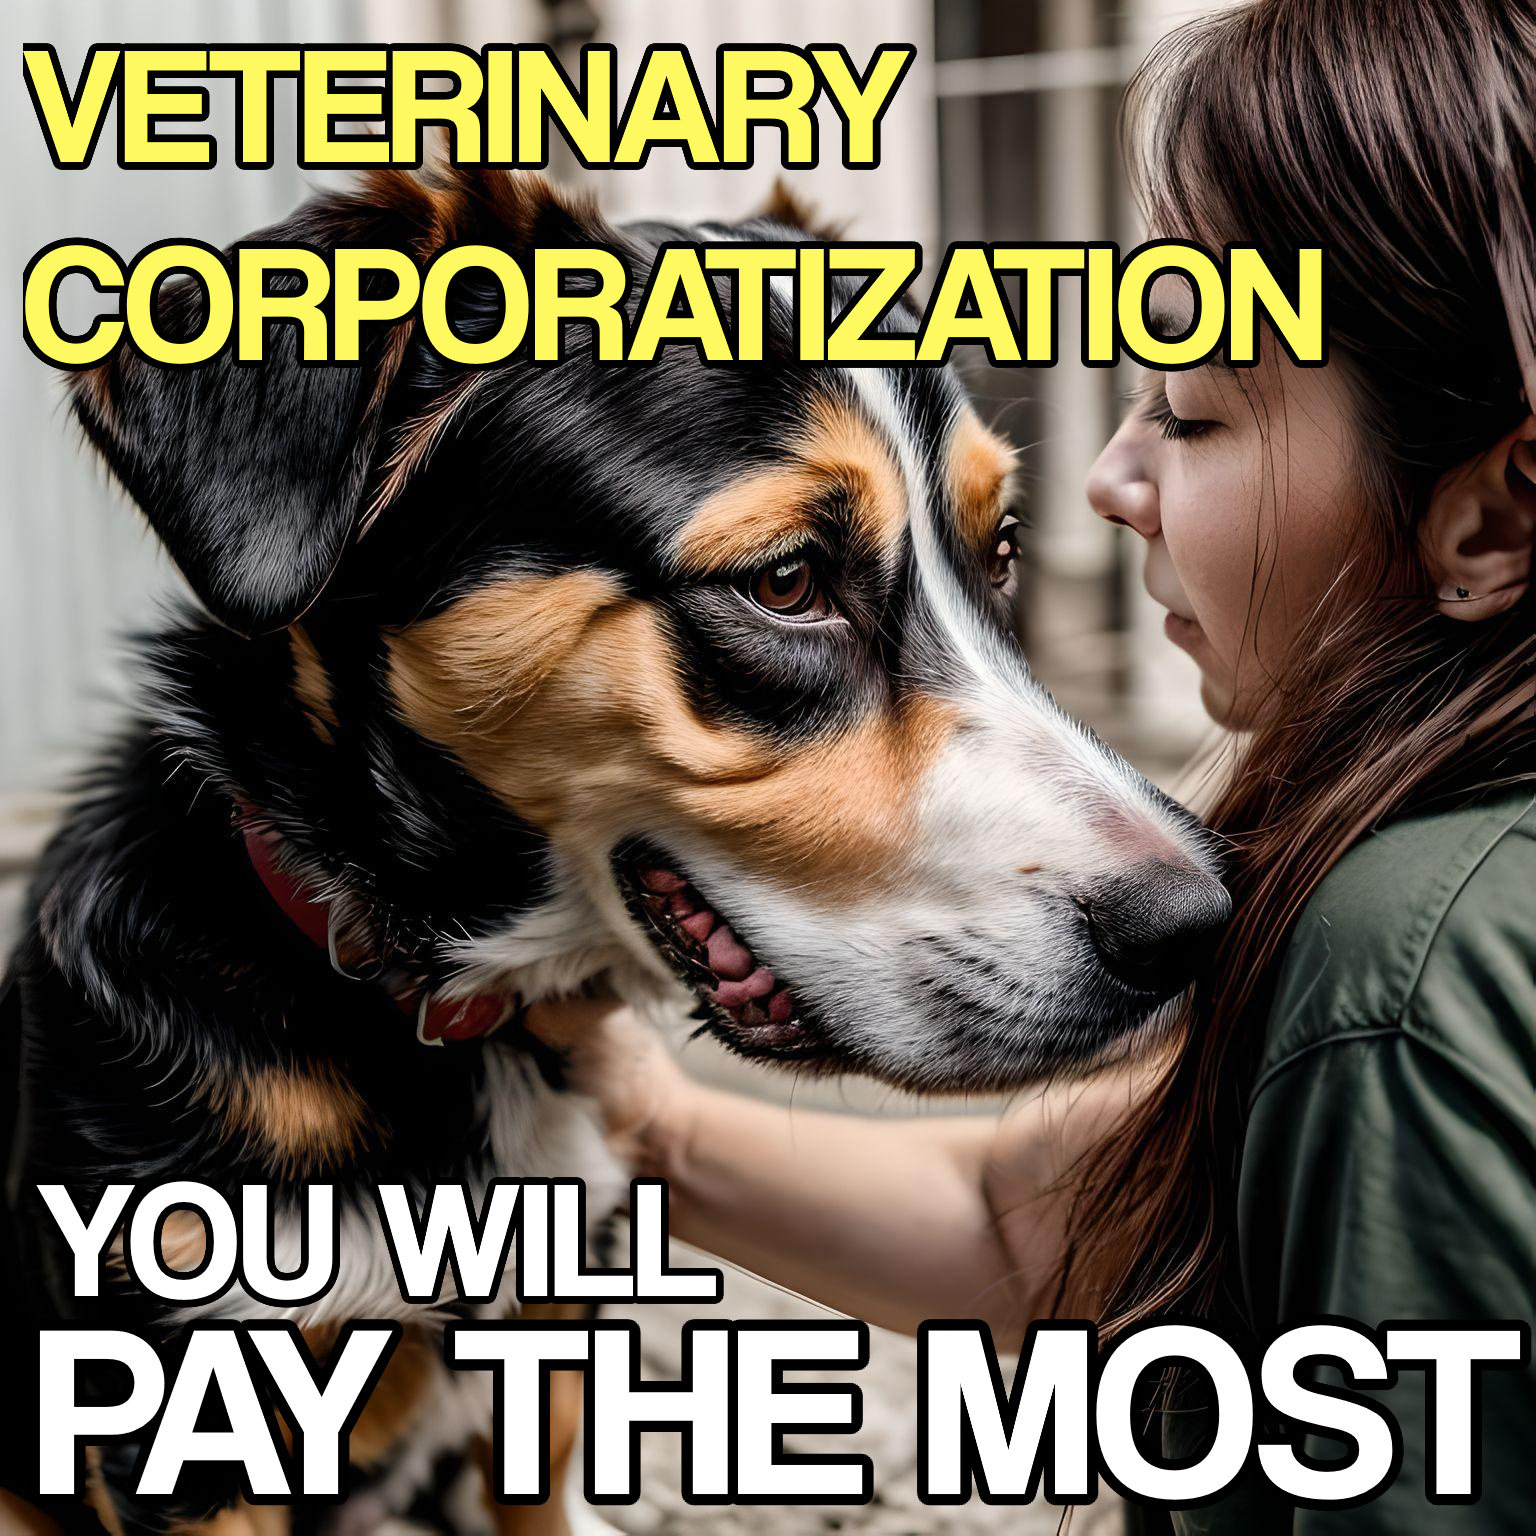 Why Franchise / Corporate Veterinary Medicine Is a Cause for Concern With Customers